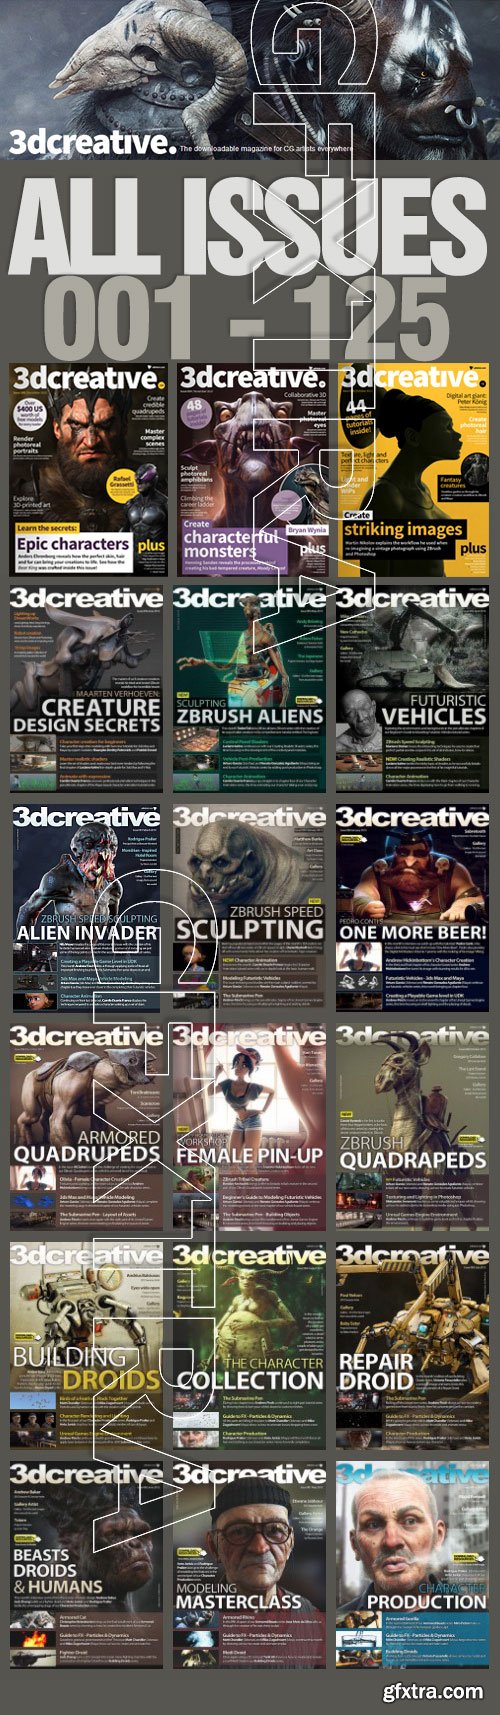 3DCreative Magazine Collection - All 125 Issues!